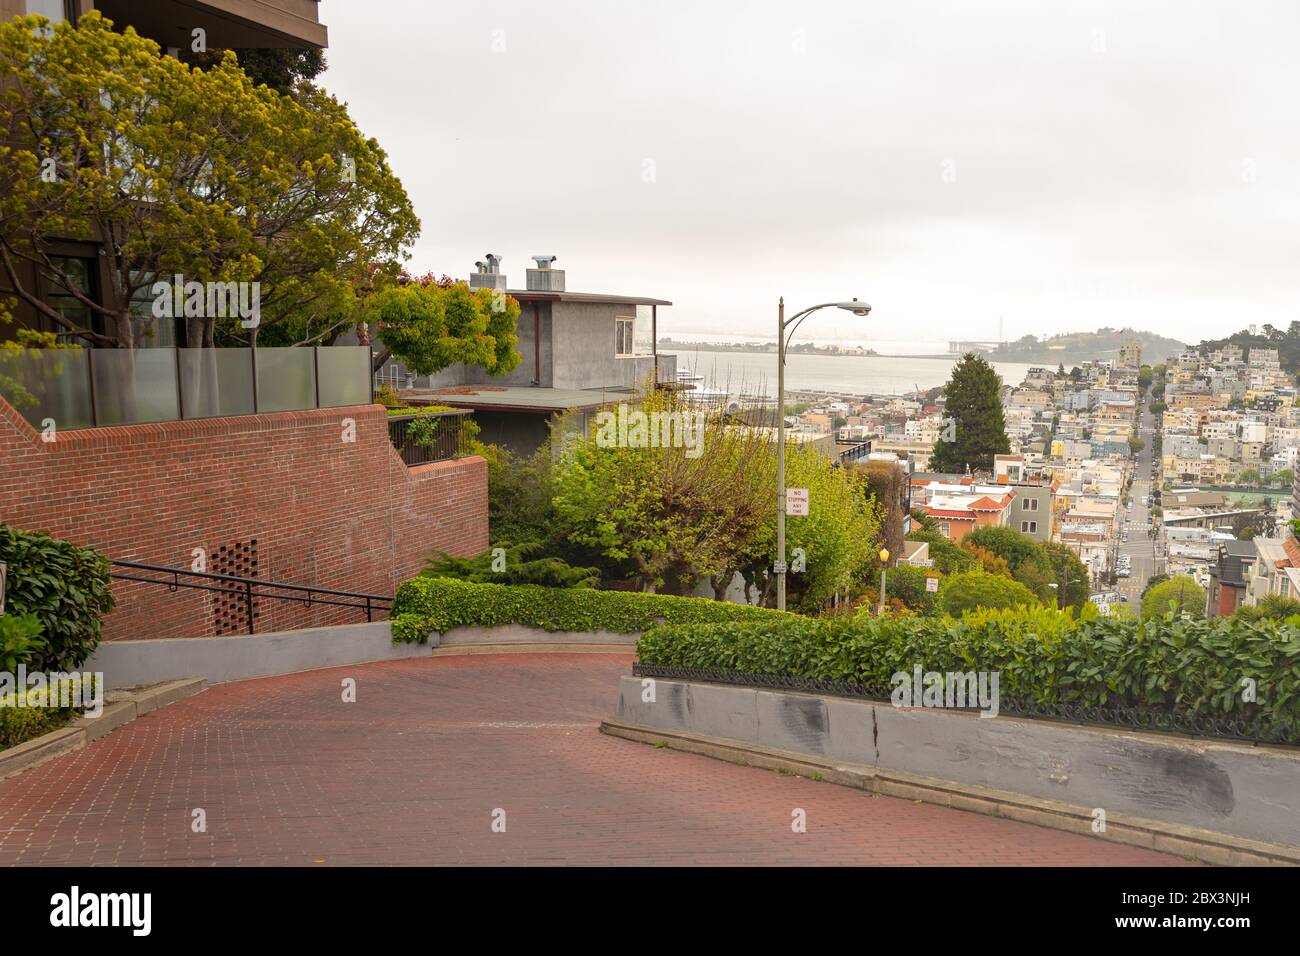 The iconic Lombard Street in San Francisco, California was deserted during an outbreak of the COVID-19 coronavirus, April 8, 2020. () Stock Photo